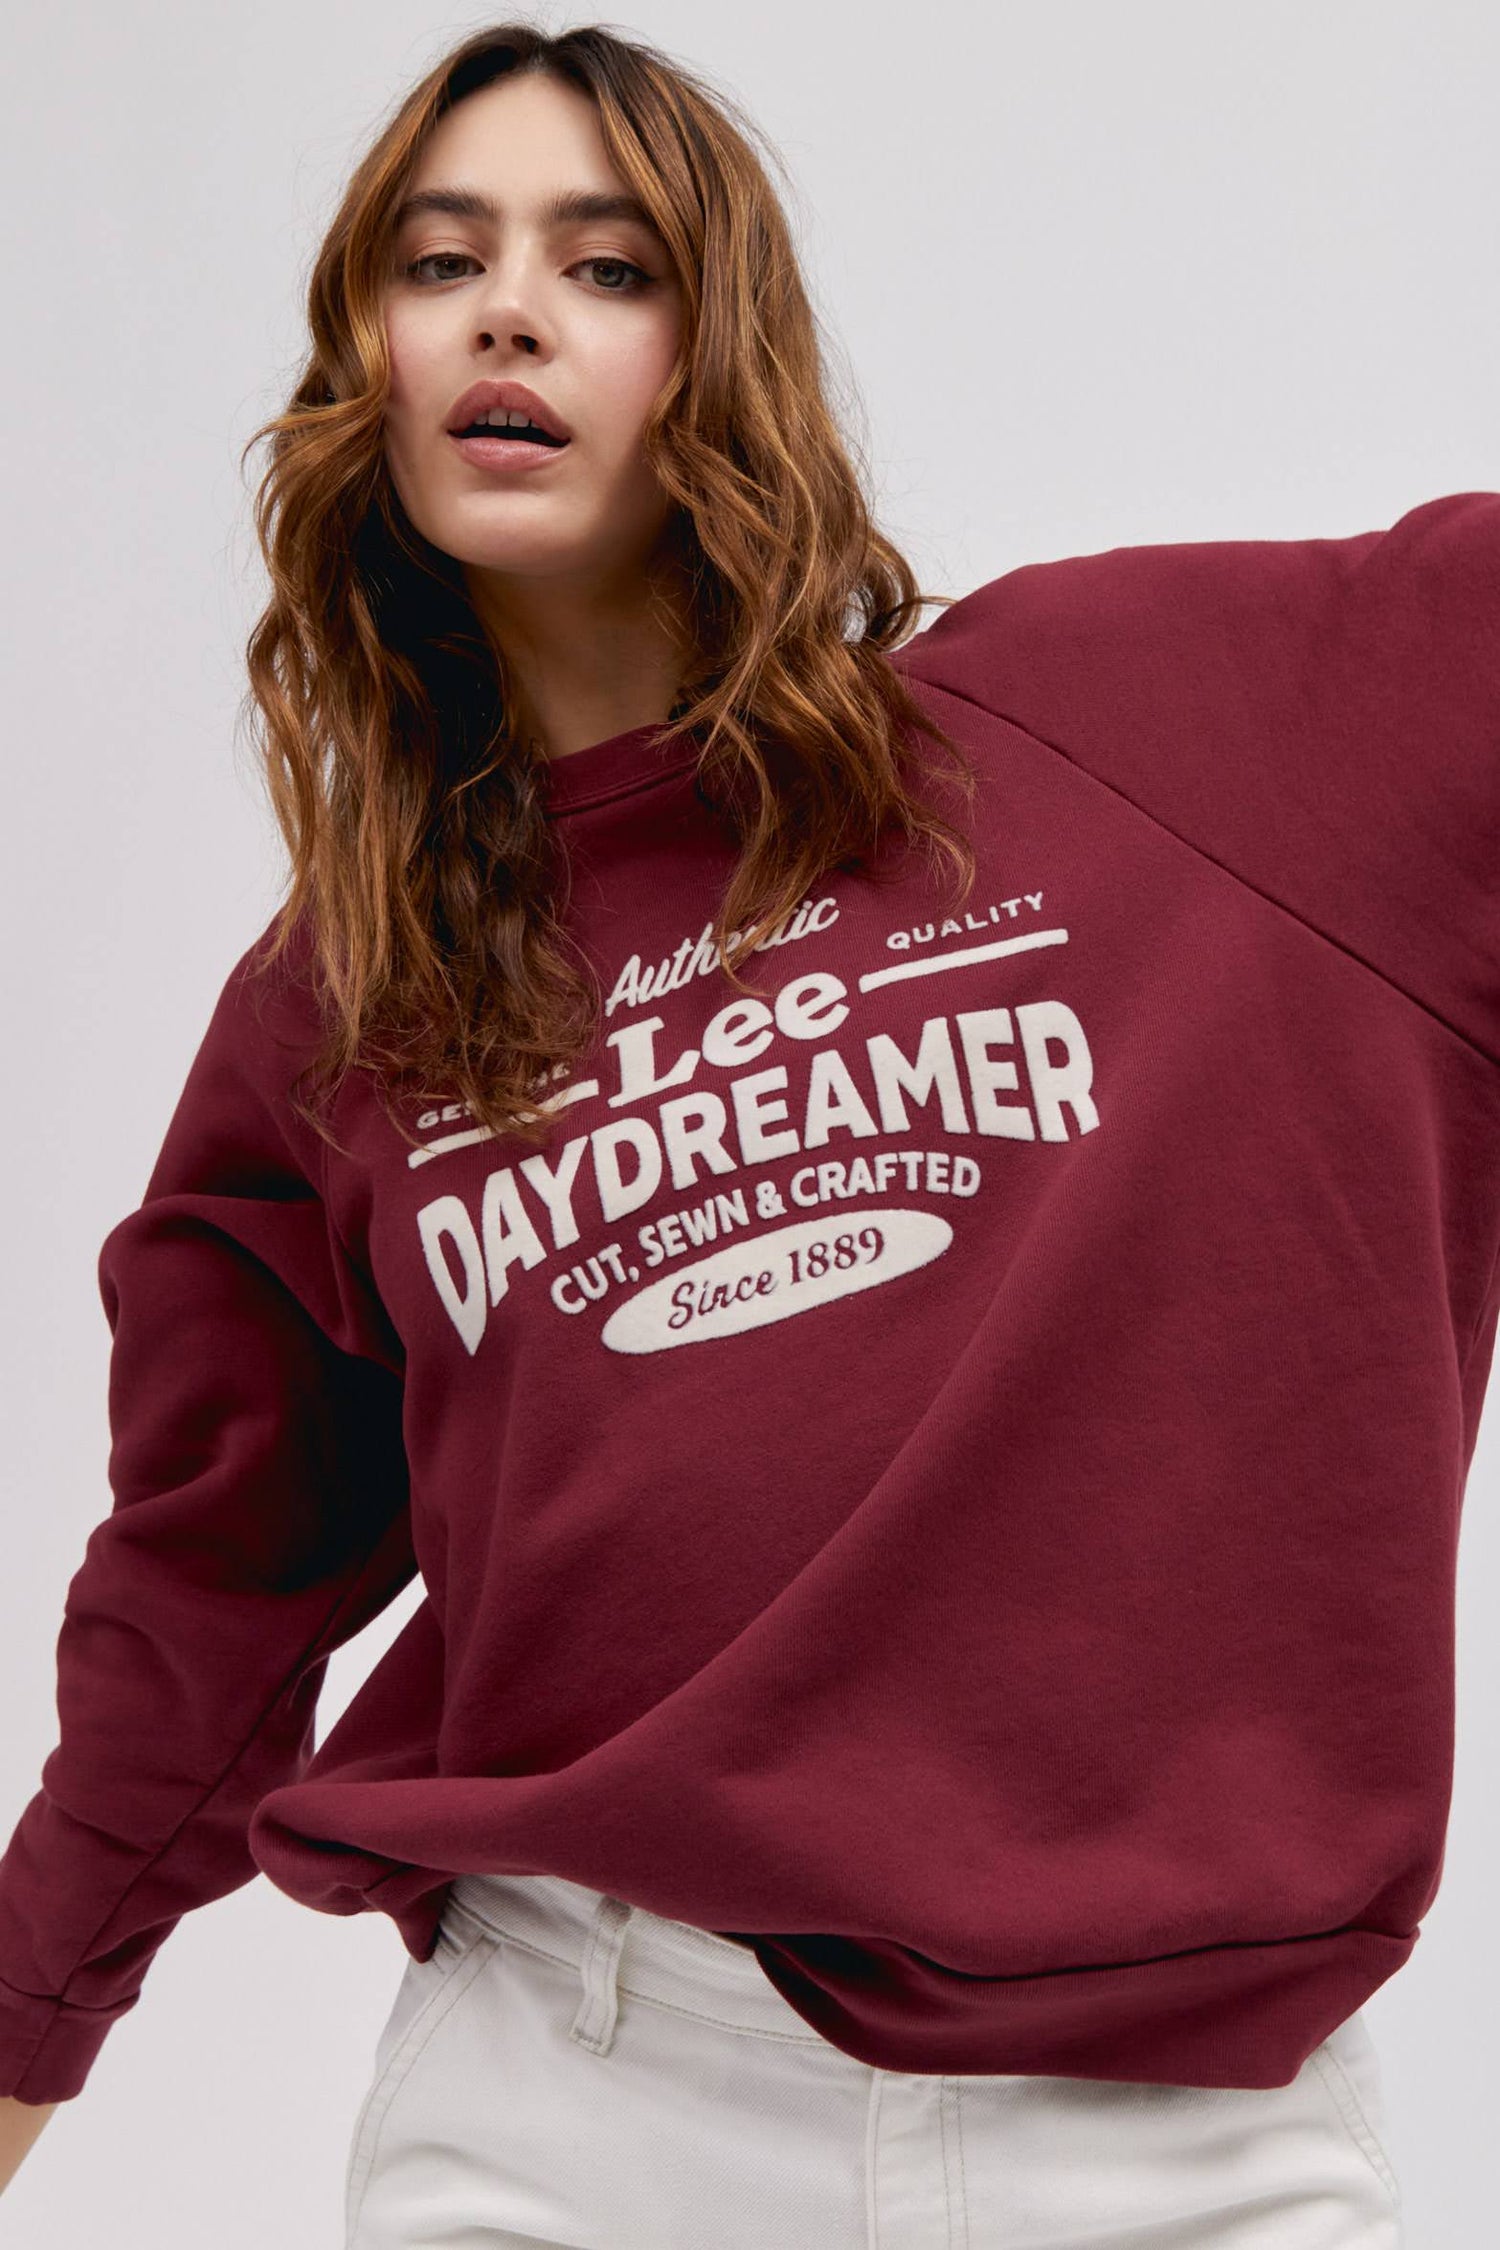 long wavy haired model posing while wearing maroon colored sweatshirt with flocked logo graphics